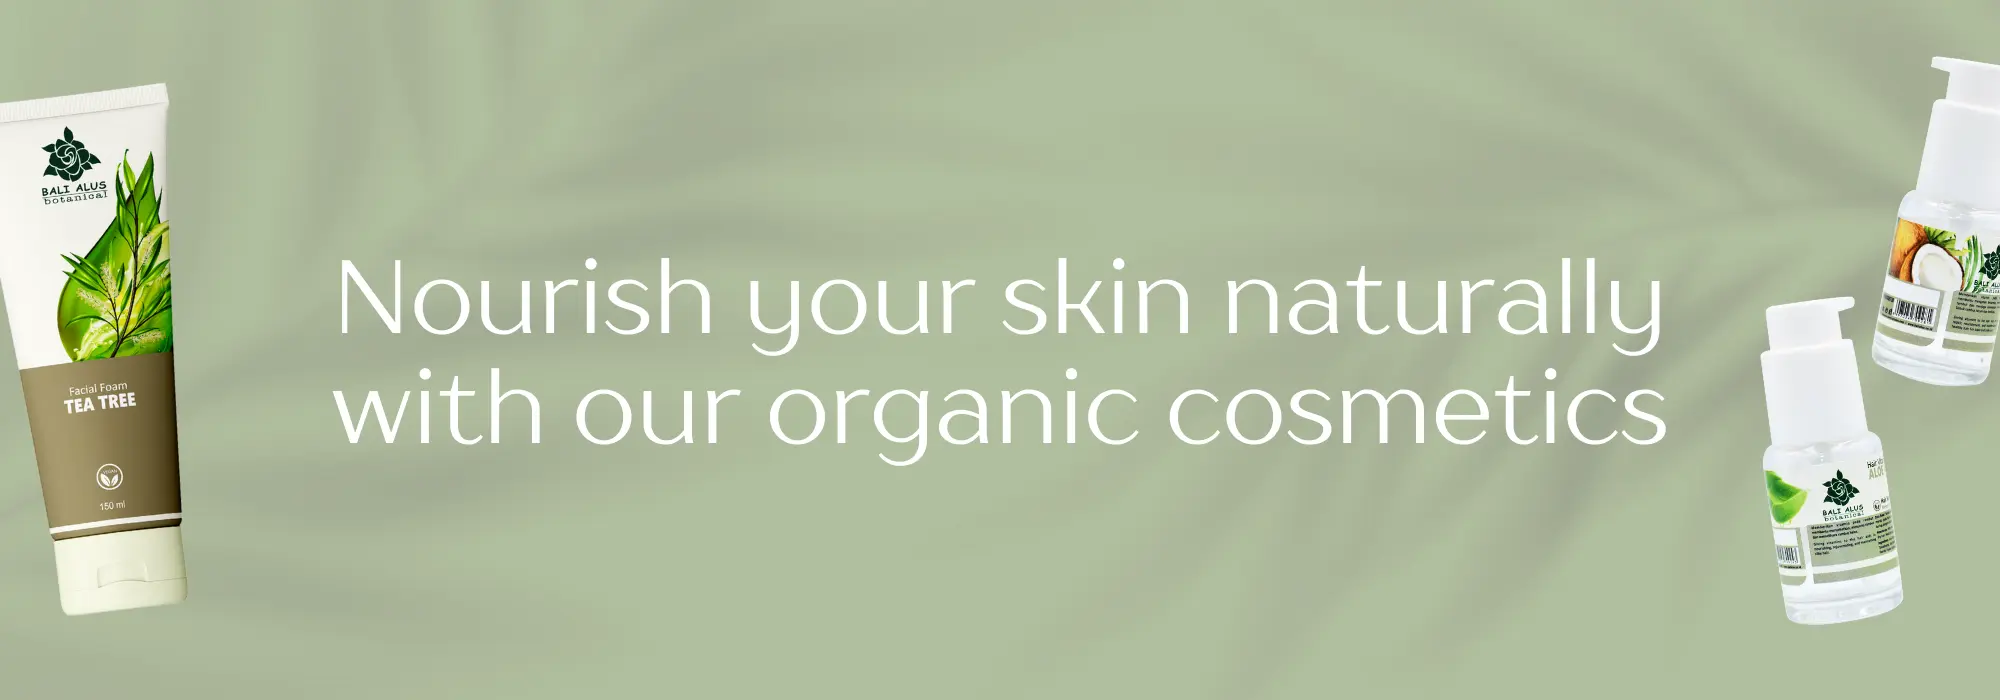 Nourish your skin naturally with our organic cosmetics - Bali Alus